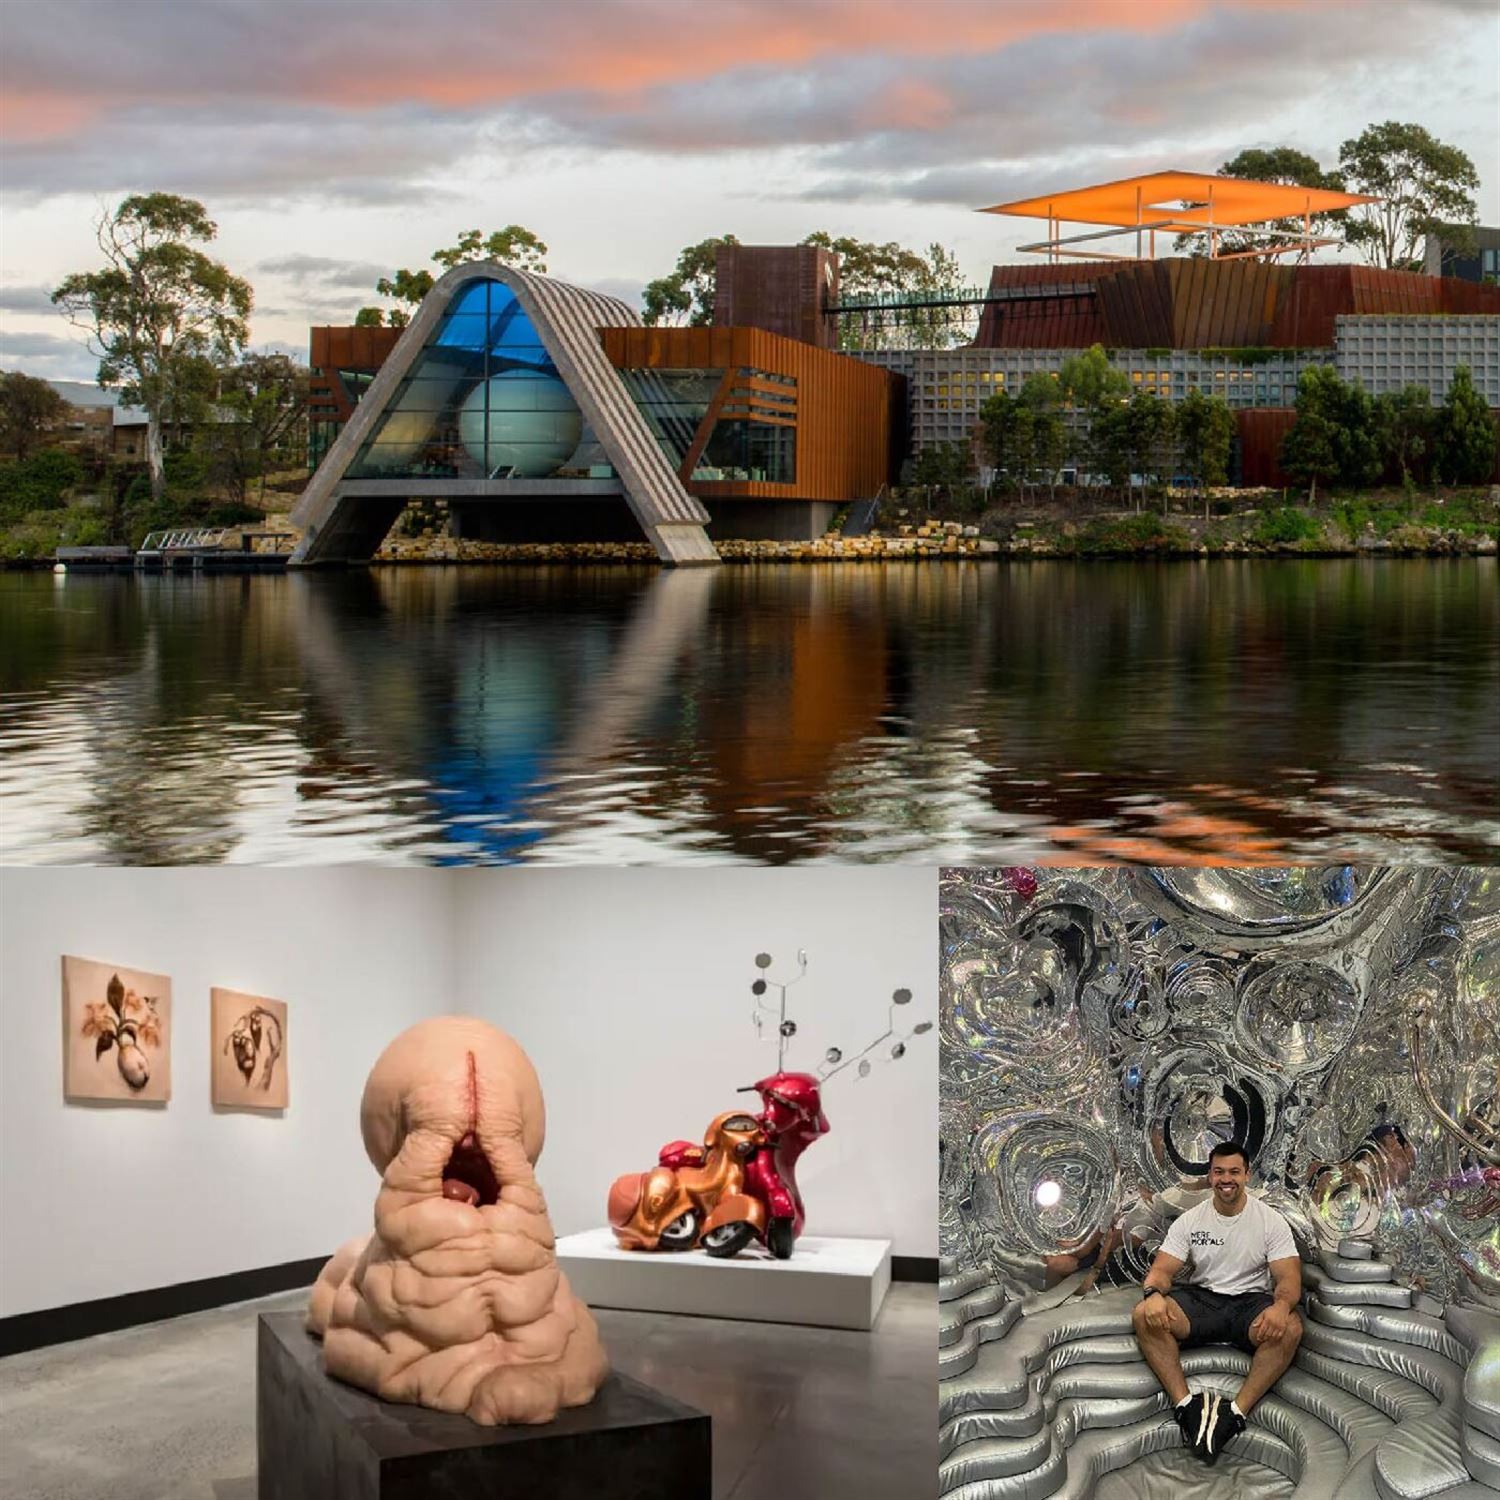 MONA: Museum of Old and New Art